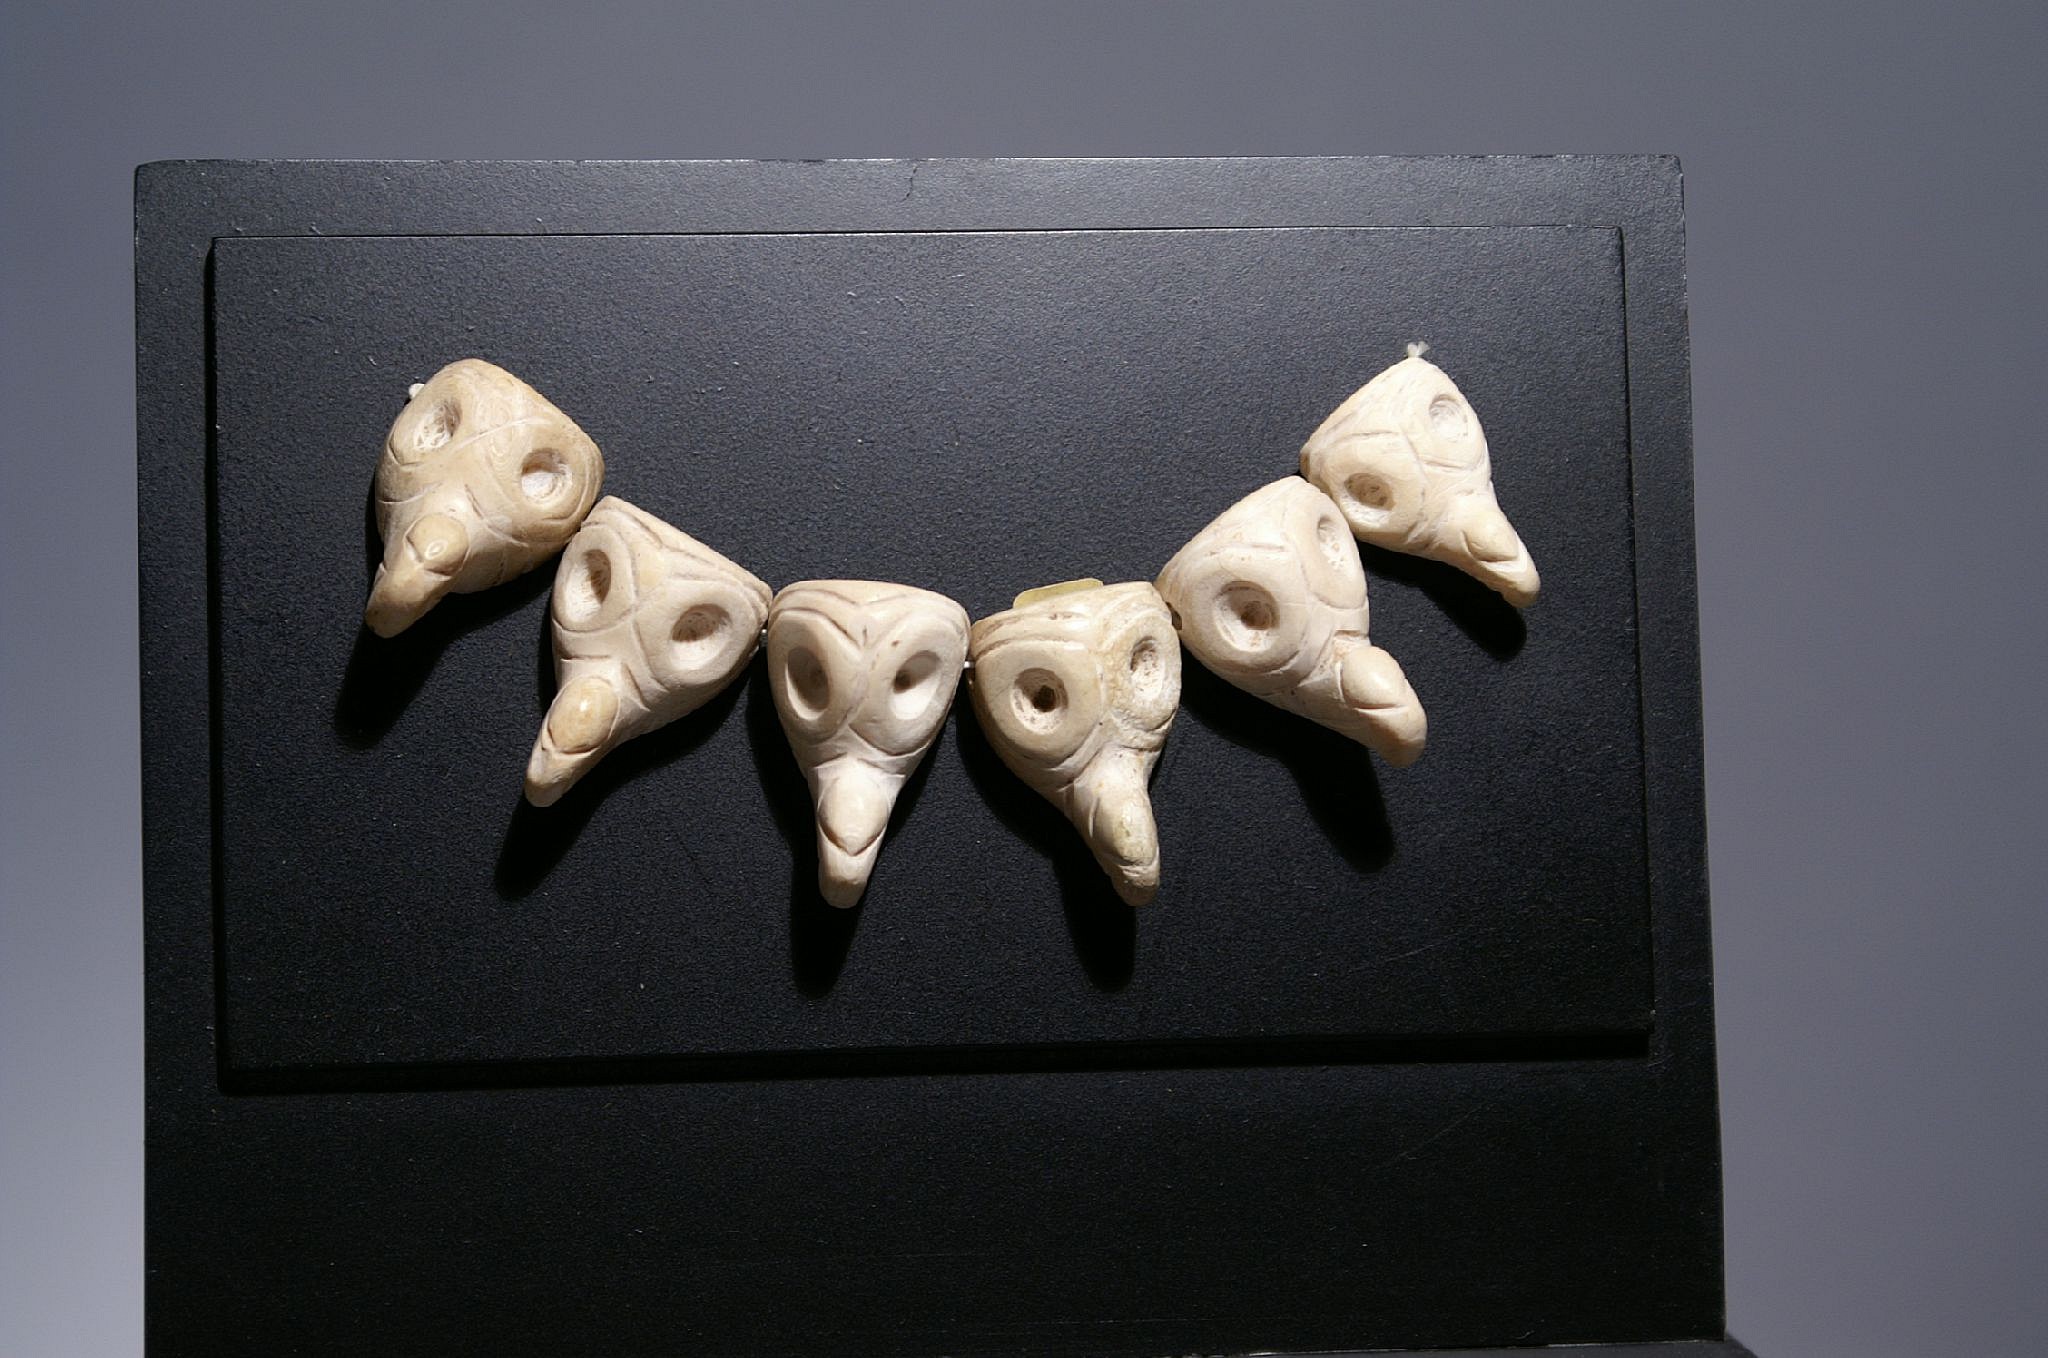 Mexico, Six Huastec Carved Shells in the Form of Condor Heads
These raptorial bird heads were clearly a part of the same original necklace.  The bird may represent the condor, an endangered species in Mexico, or another powerful raptor that had mythological significance. Each shell head was drilled in the back with two conical drill holes. Colorado collector prior to 1997.
Media: Shell
Dimensions: Length 4 1/2" Each head Length: 1"
$1,800
97162